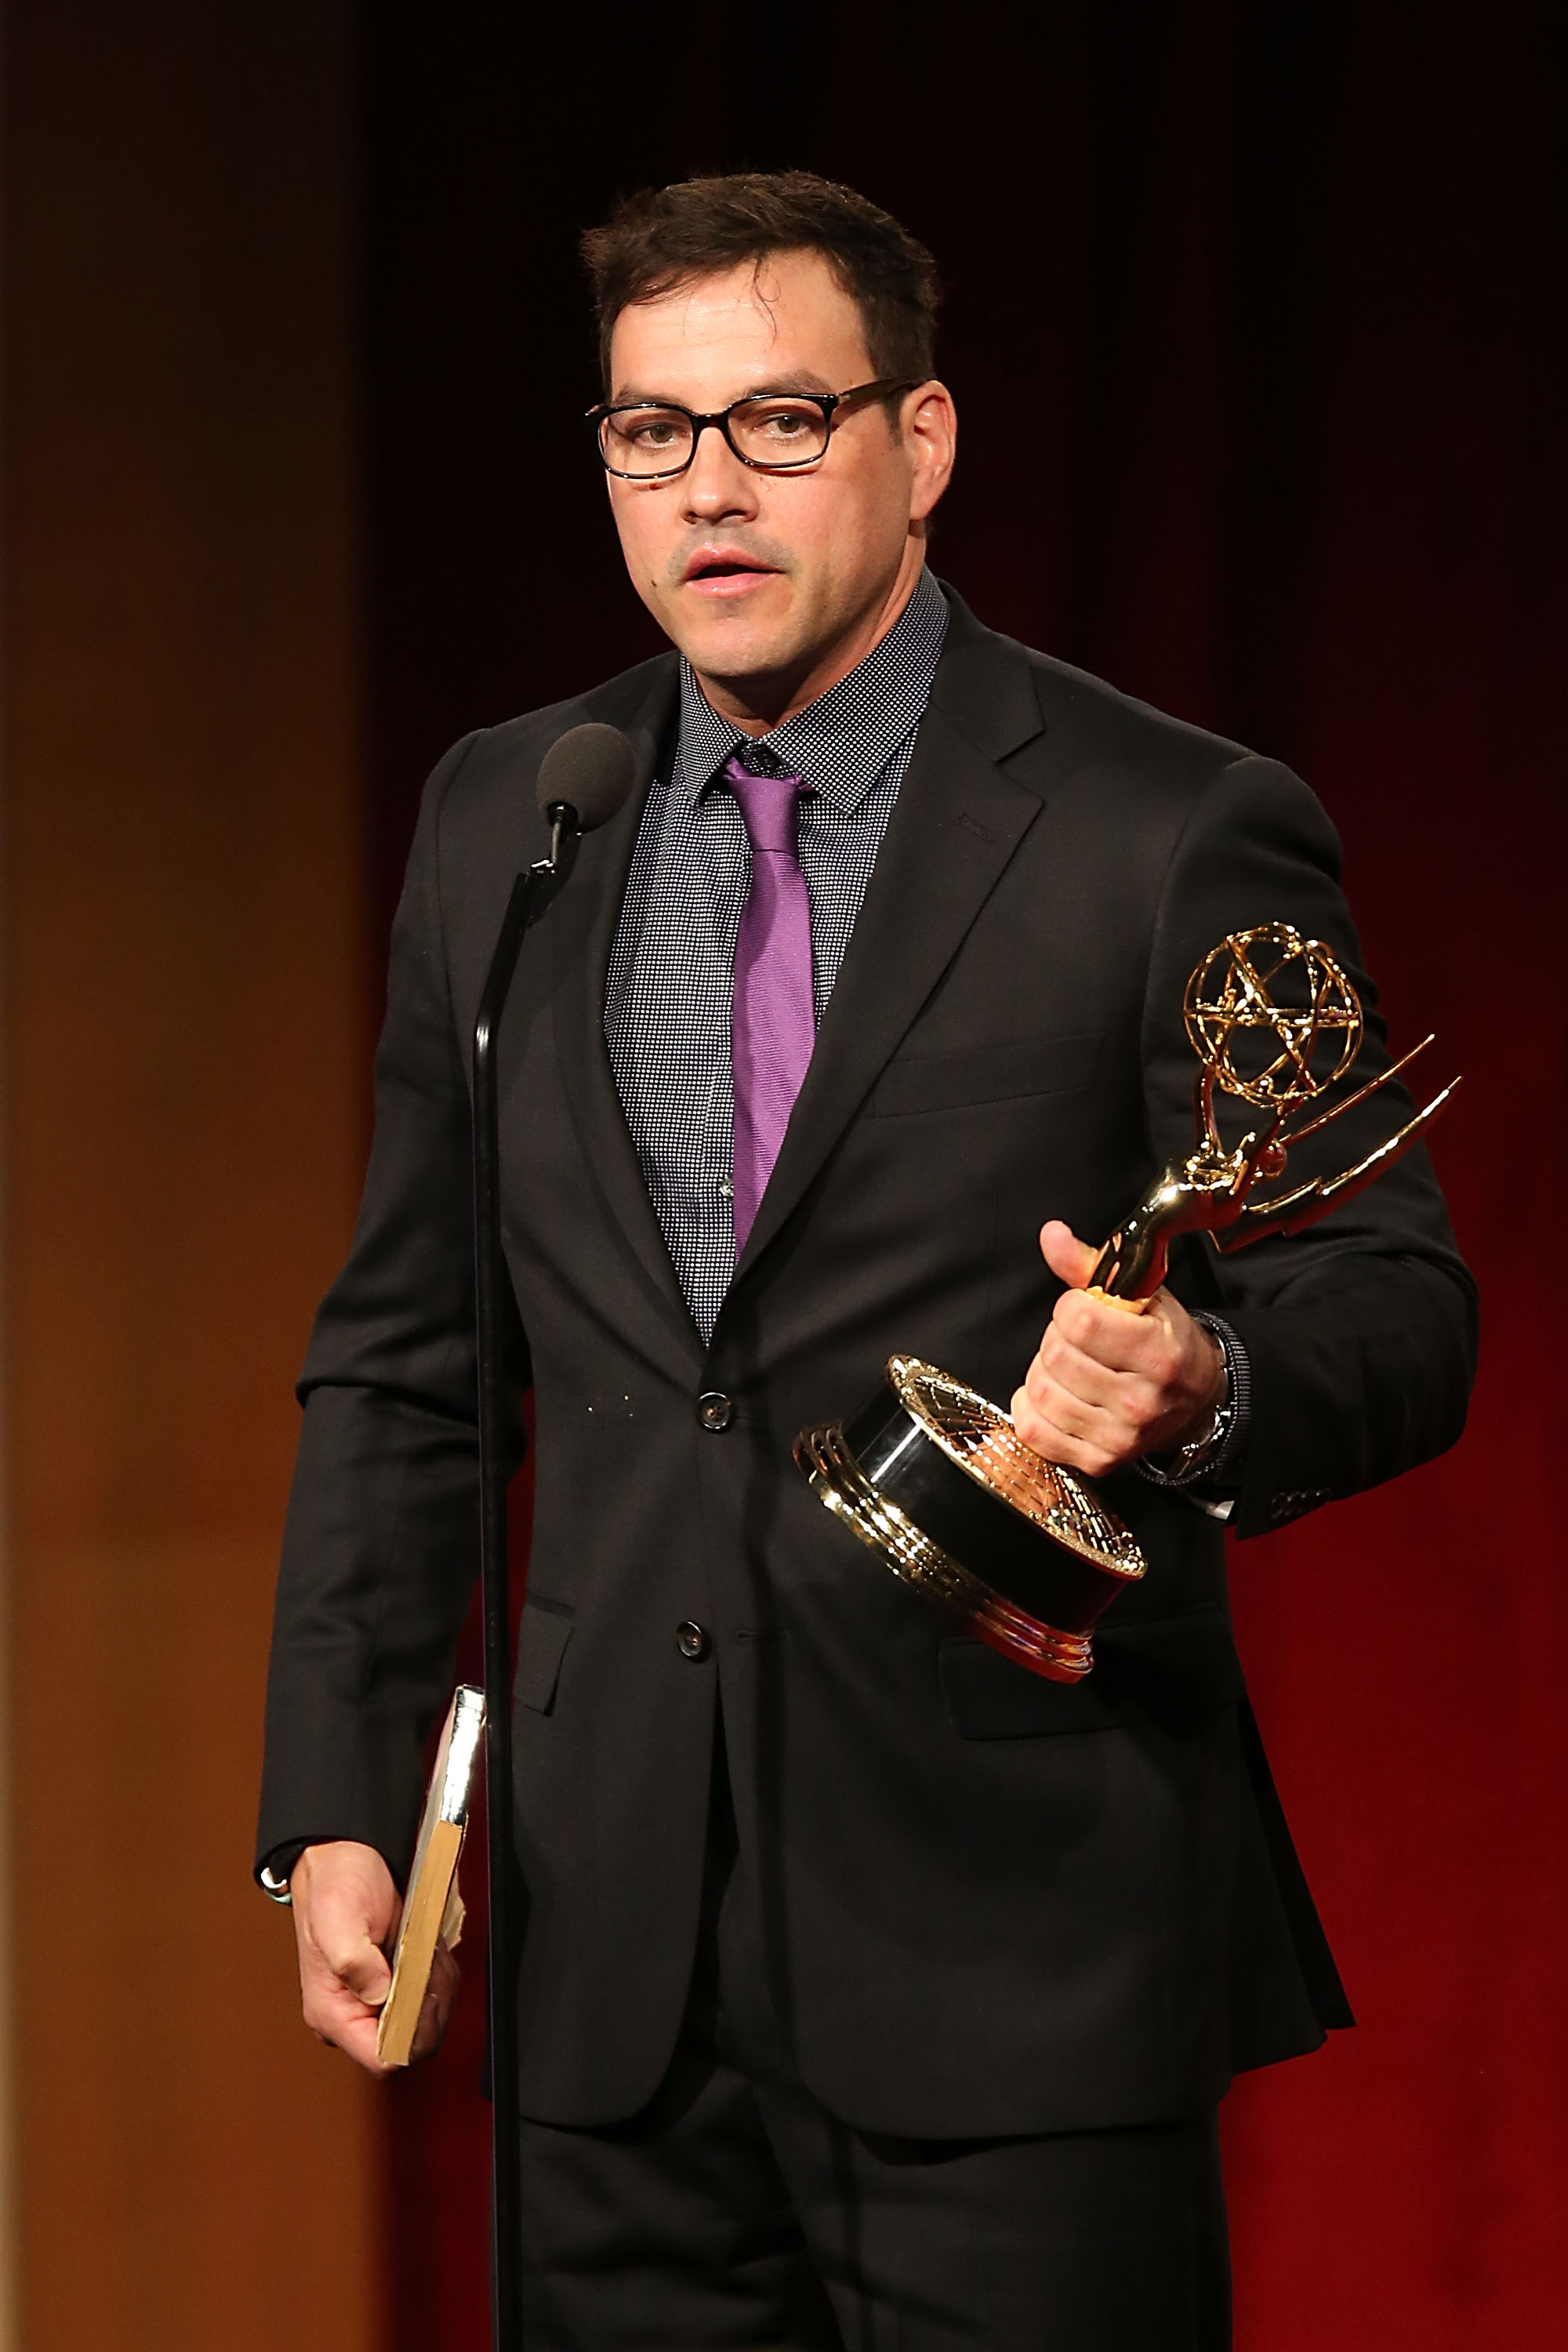 Tyler Christopher speaks onstage at the Daytime Emmy Awards in Los Angeles, California on May 1, 2016 | Source: Getty Images